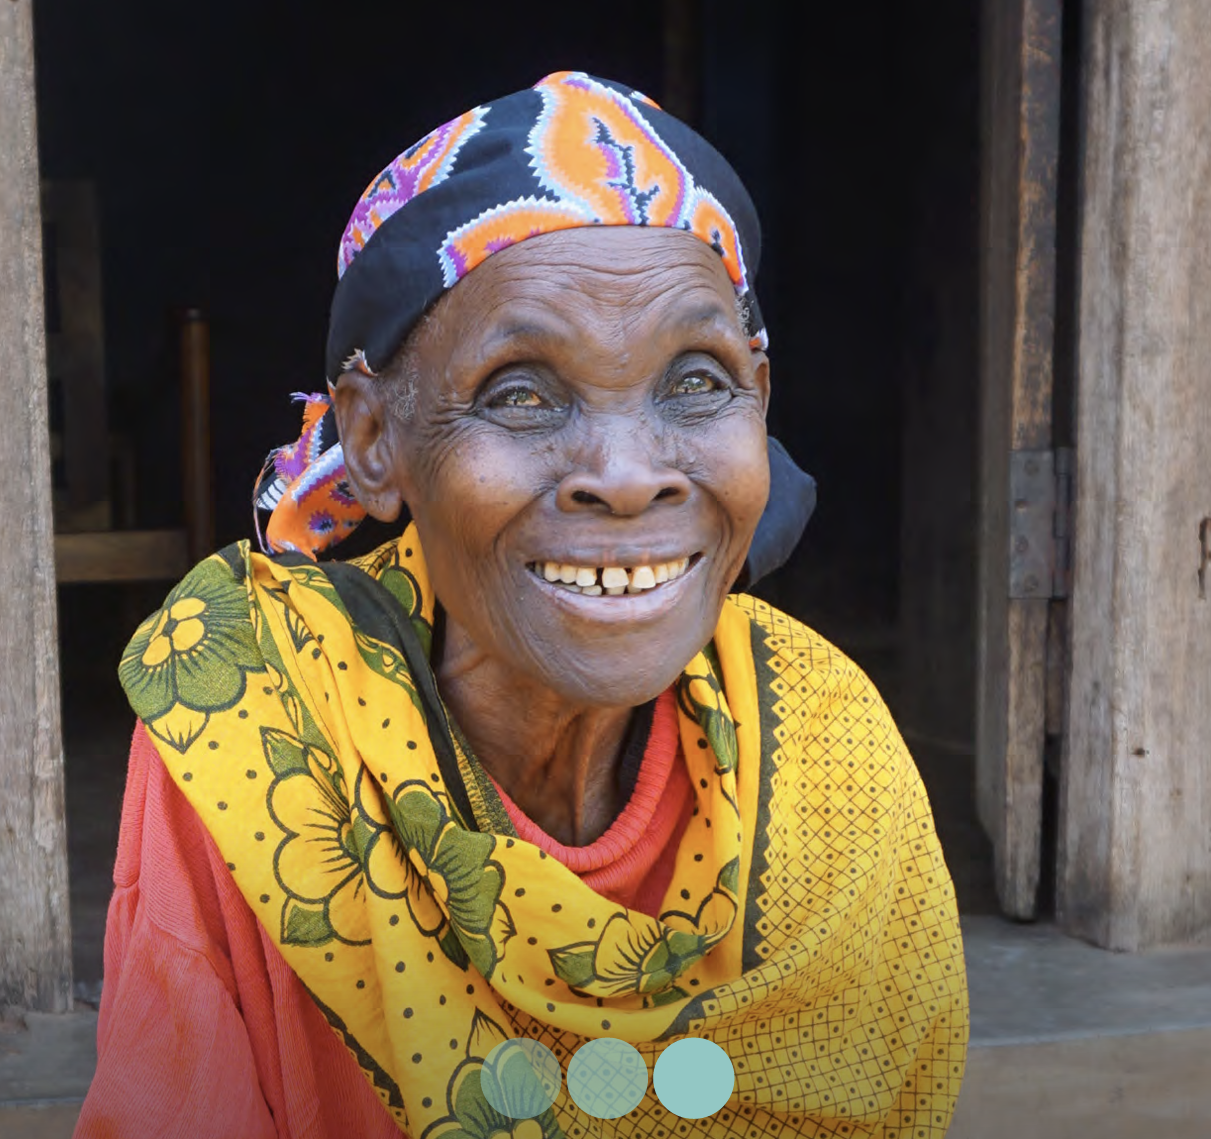 Teodosia smiles outside her rural village home on the front cover of the Annual Review 2022 for Peek Vision.